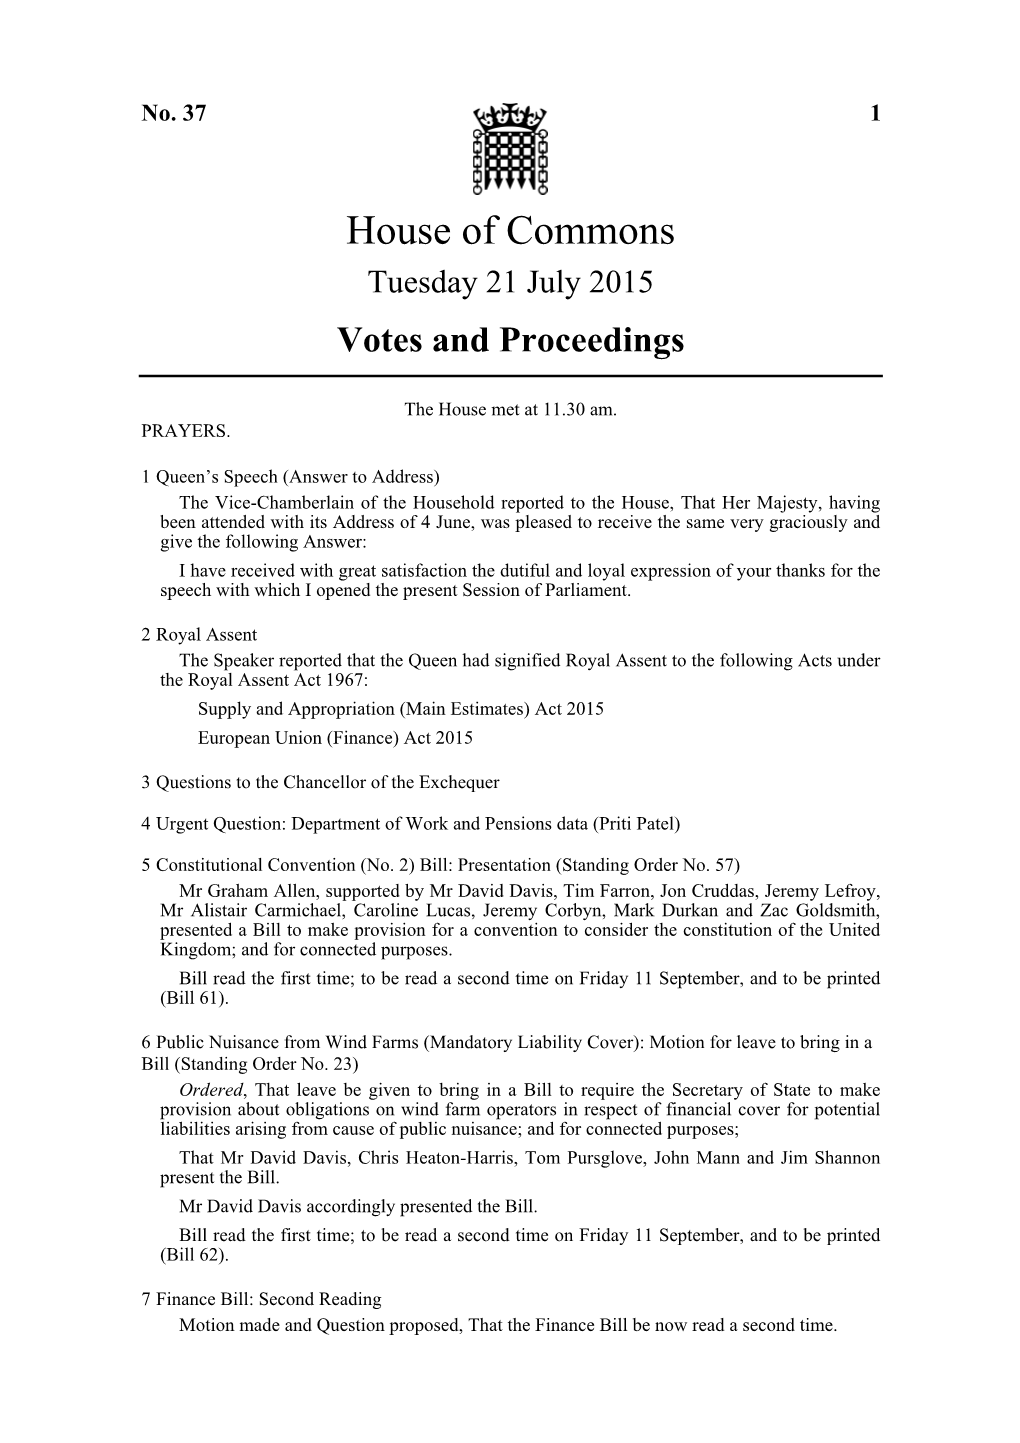 House of Commons Tuesday 21 July 2015 Votes and Proceedings